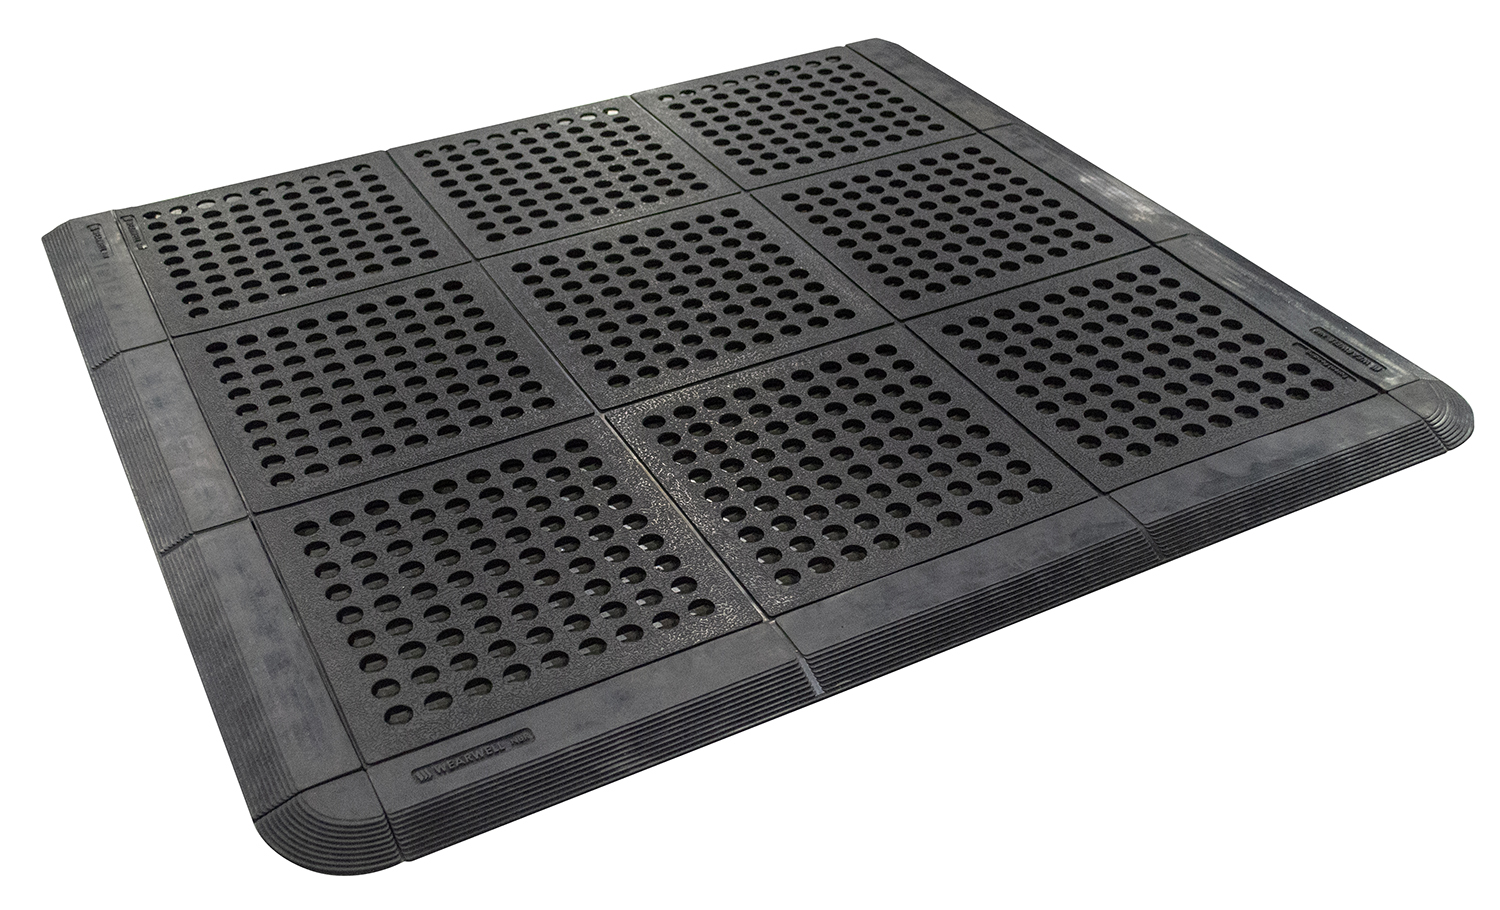 LockSafe drainage mat allows for free flow of air, fluids, and debris to keep traction in slippery environments.